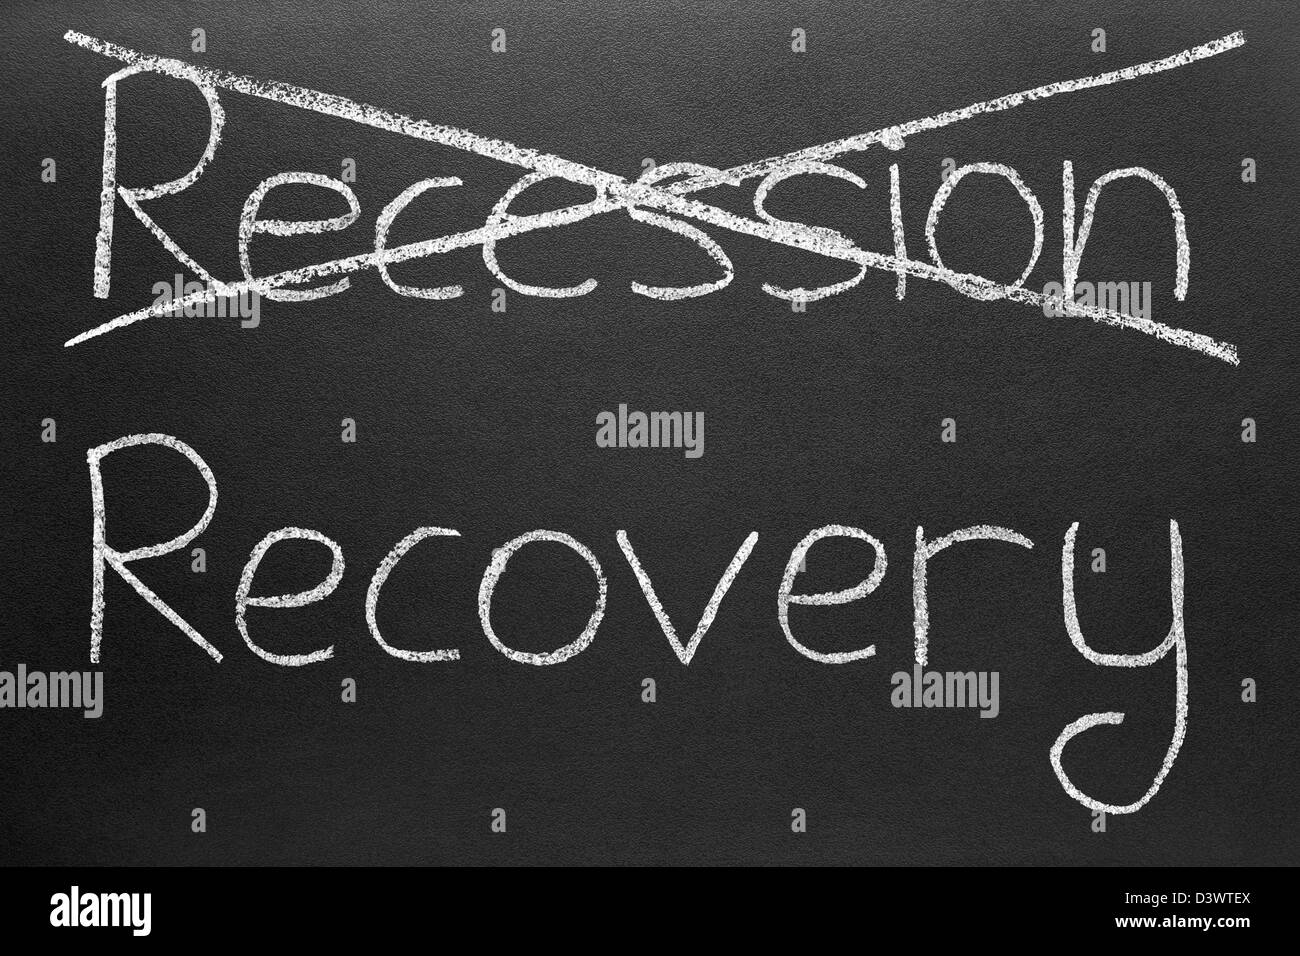 Crossing out recession and writing recovery. Stock Photo